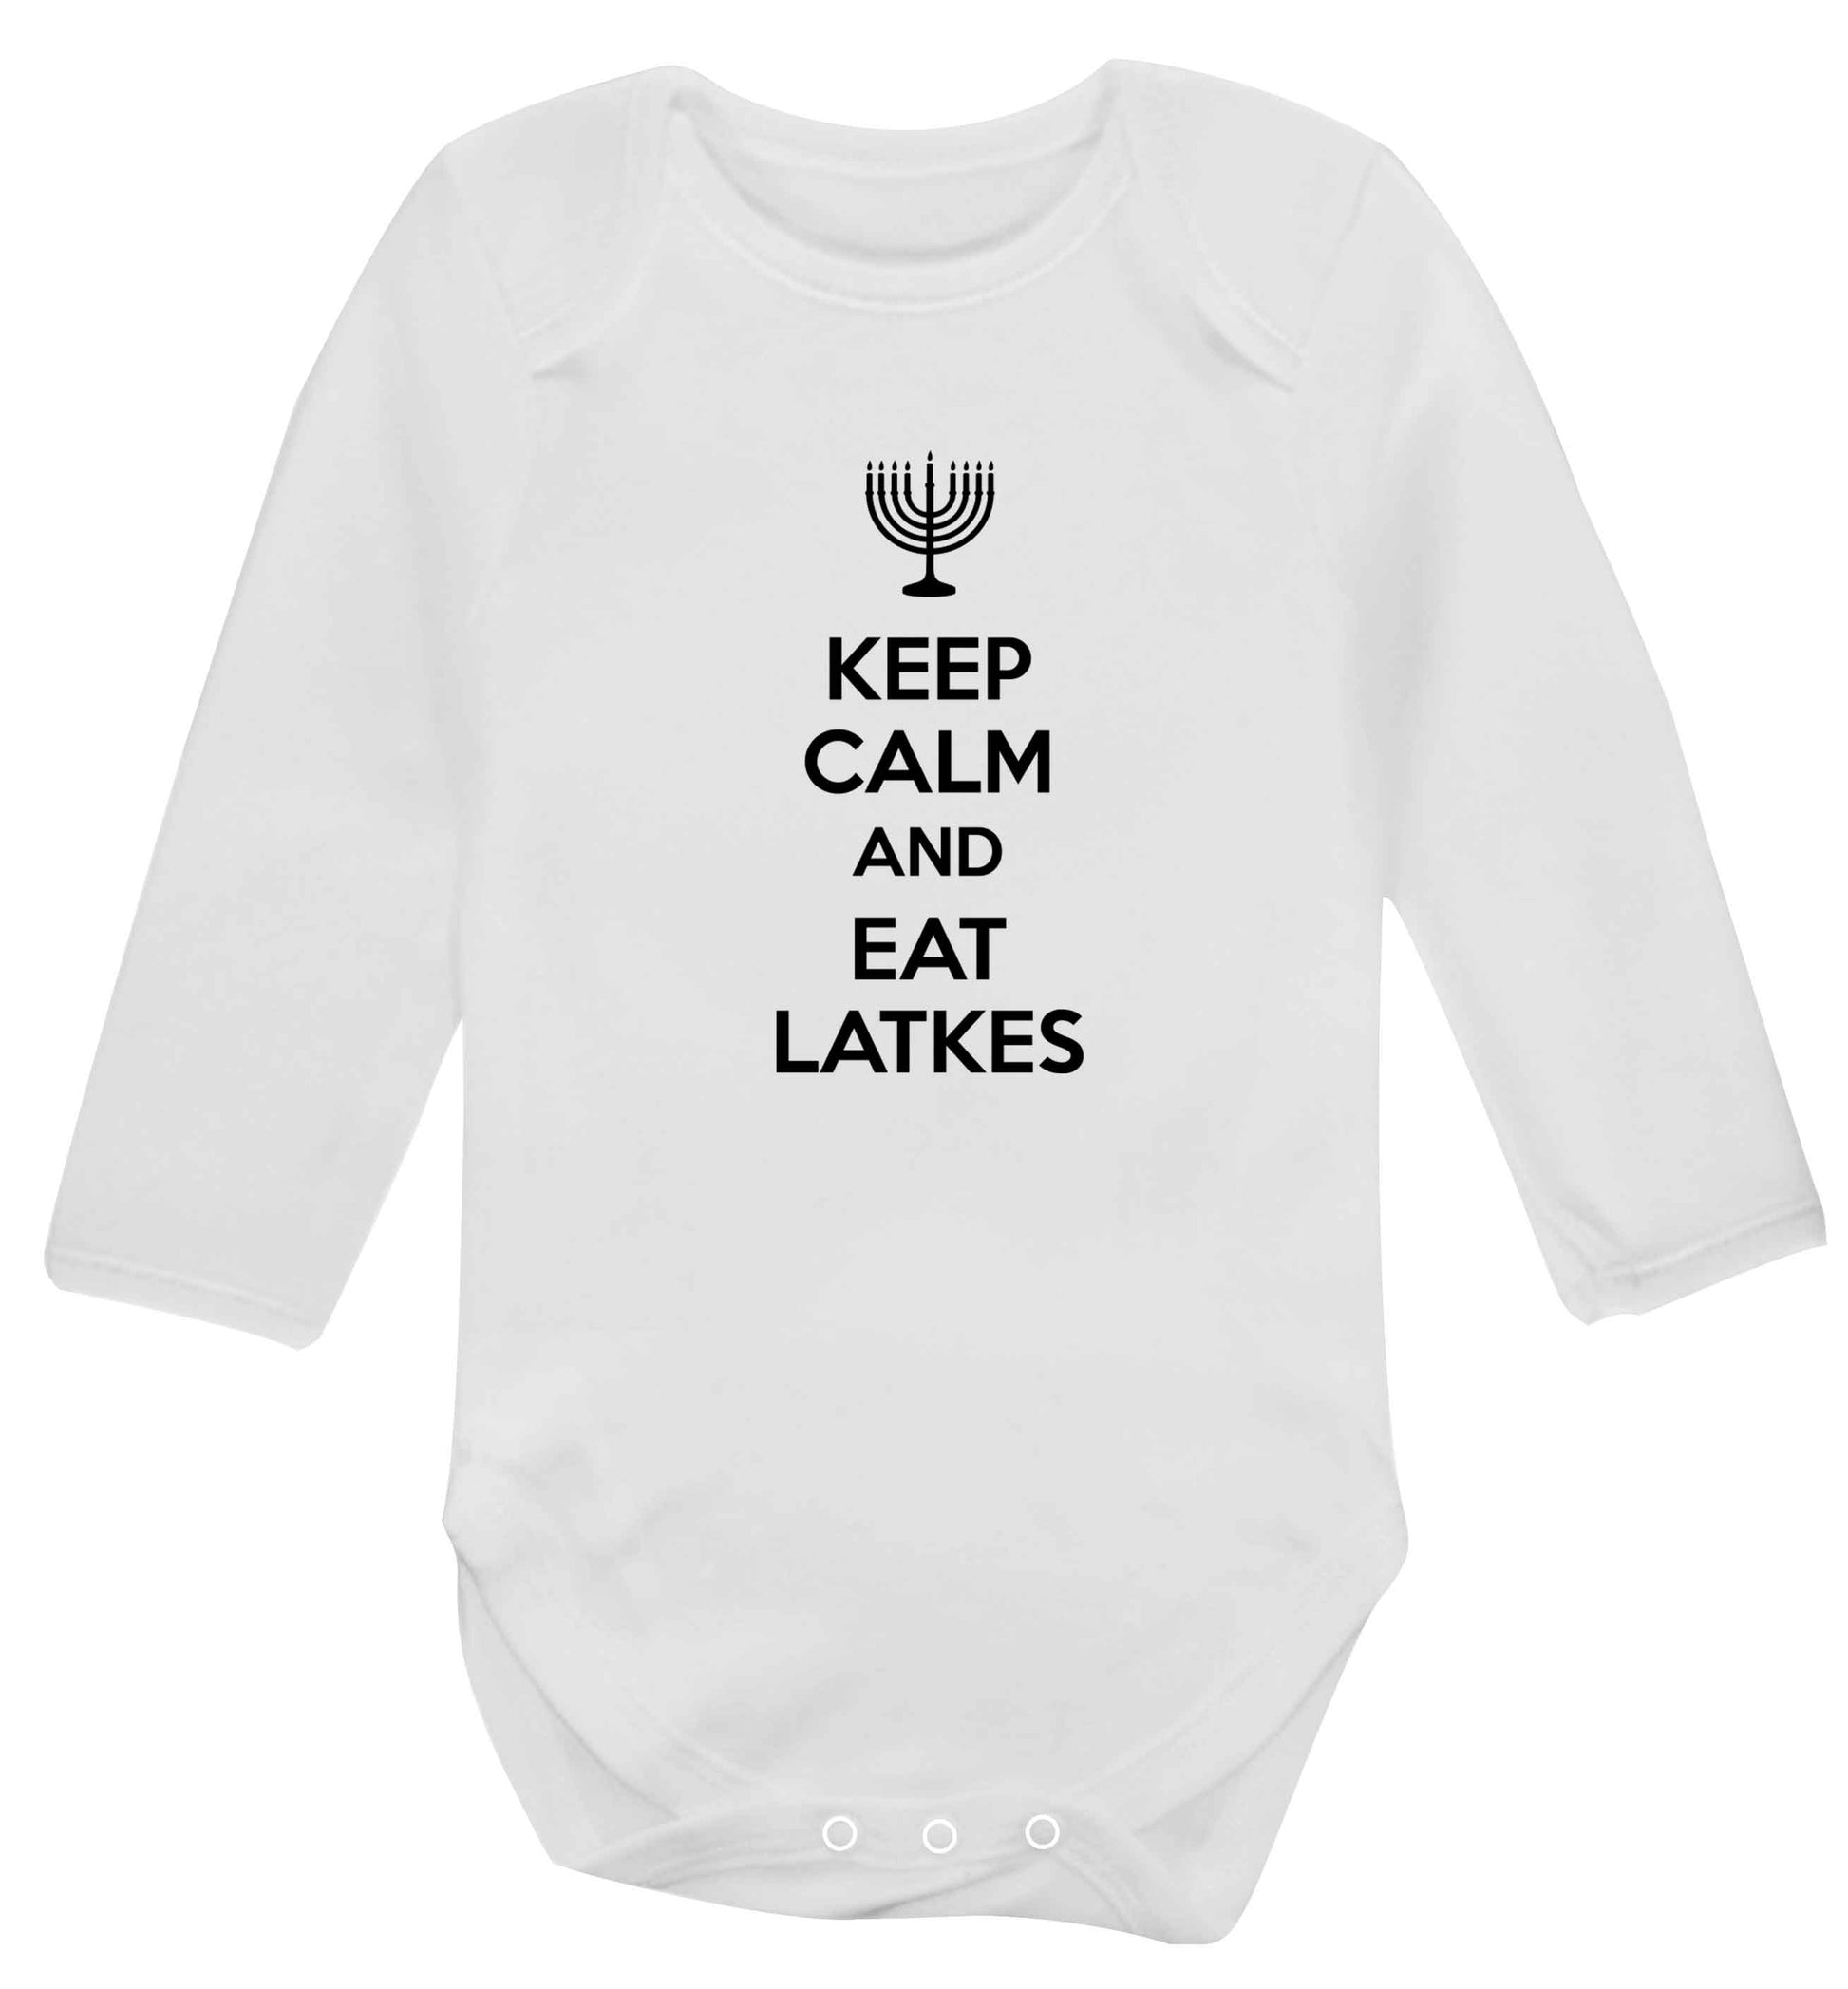 Keep calm and eat latkes baby vest long sleeved white 6-12 months